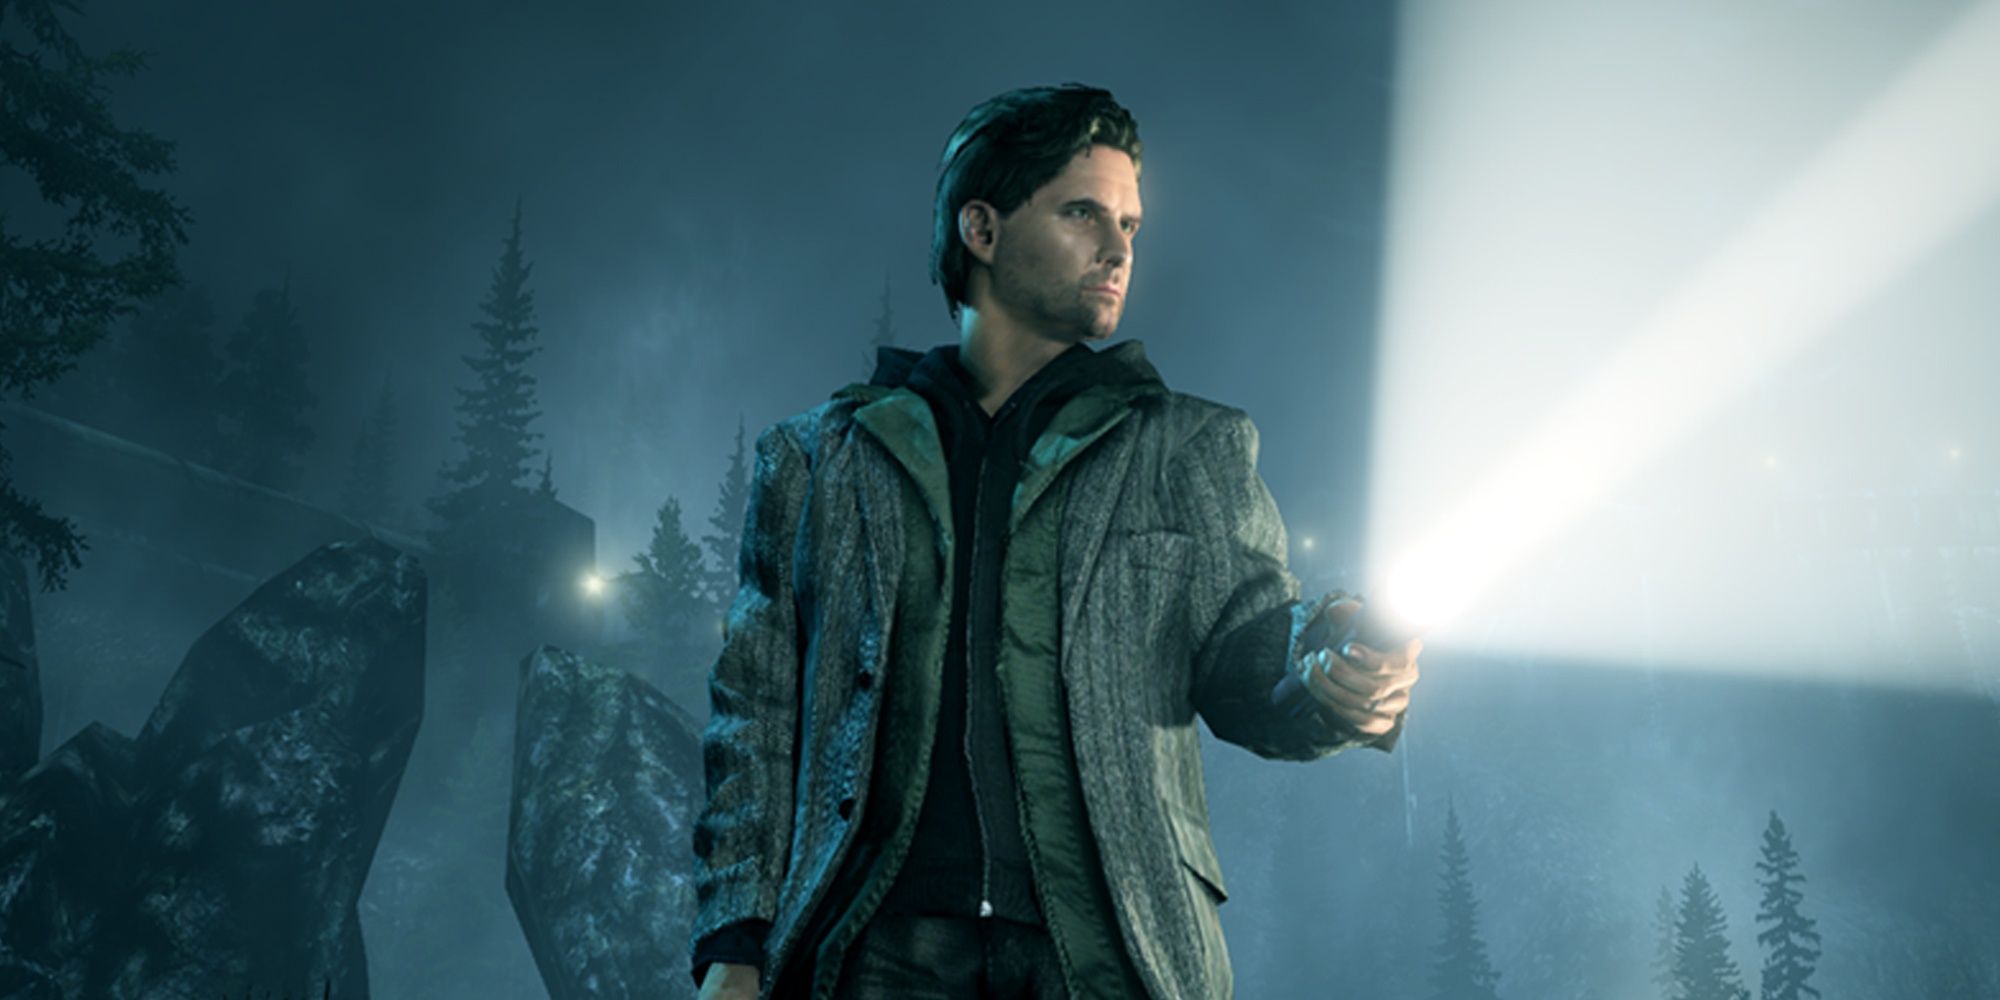 Alan Wake holding a flashlight at night. Trees line the background in fog.